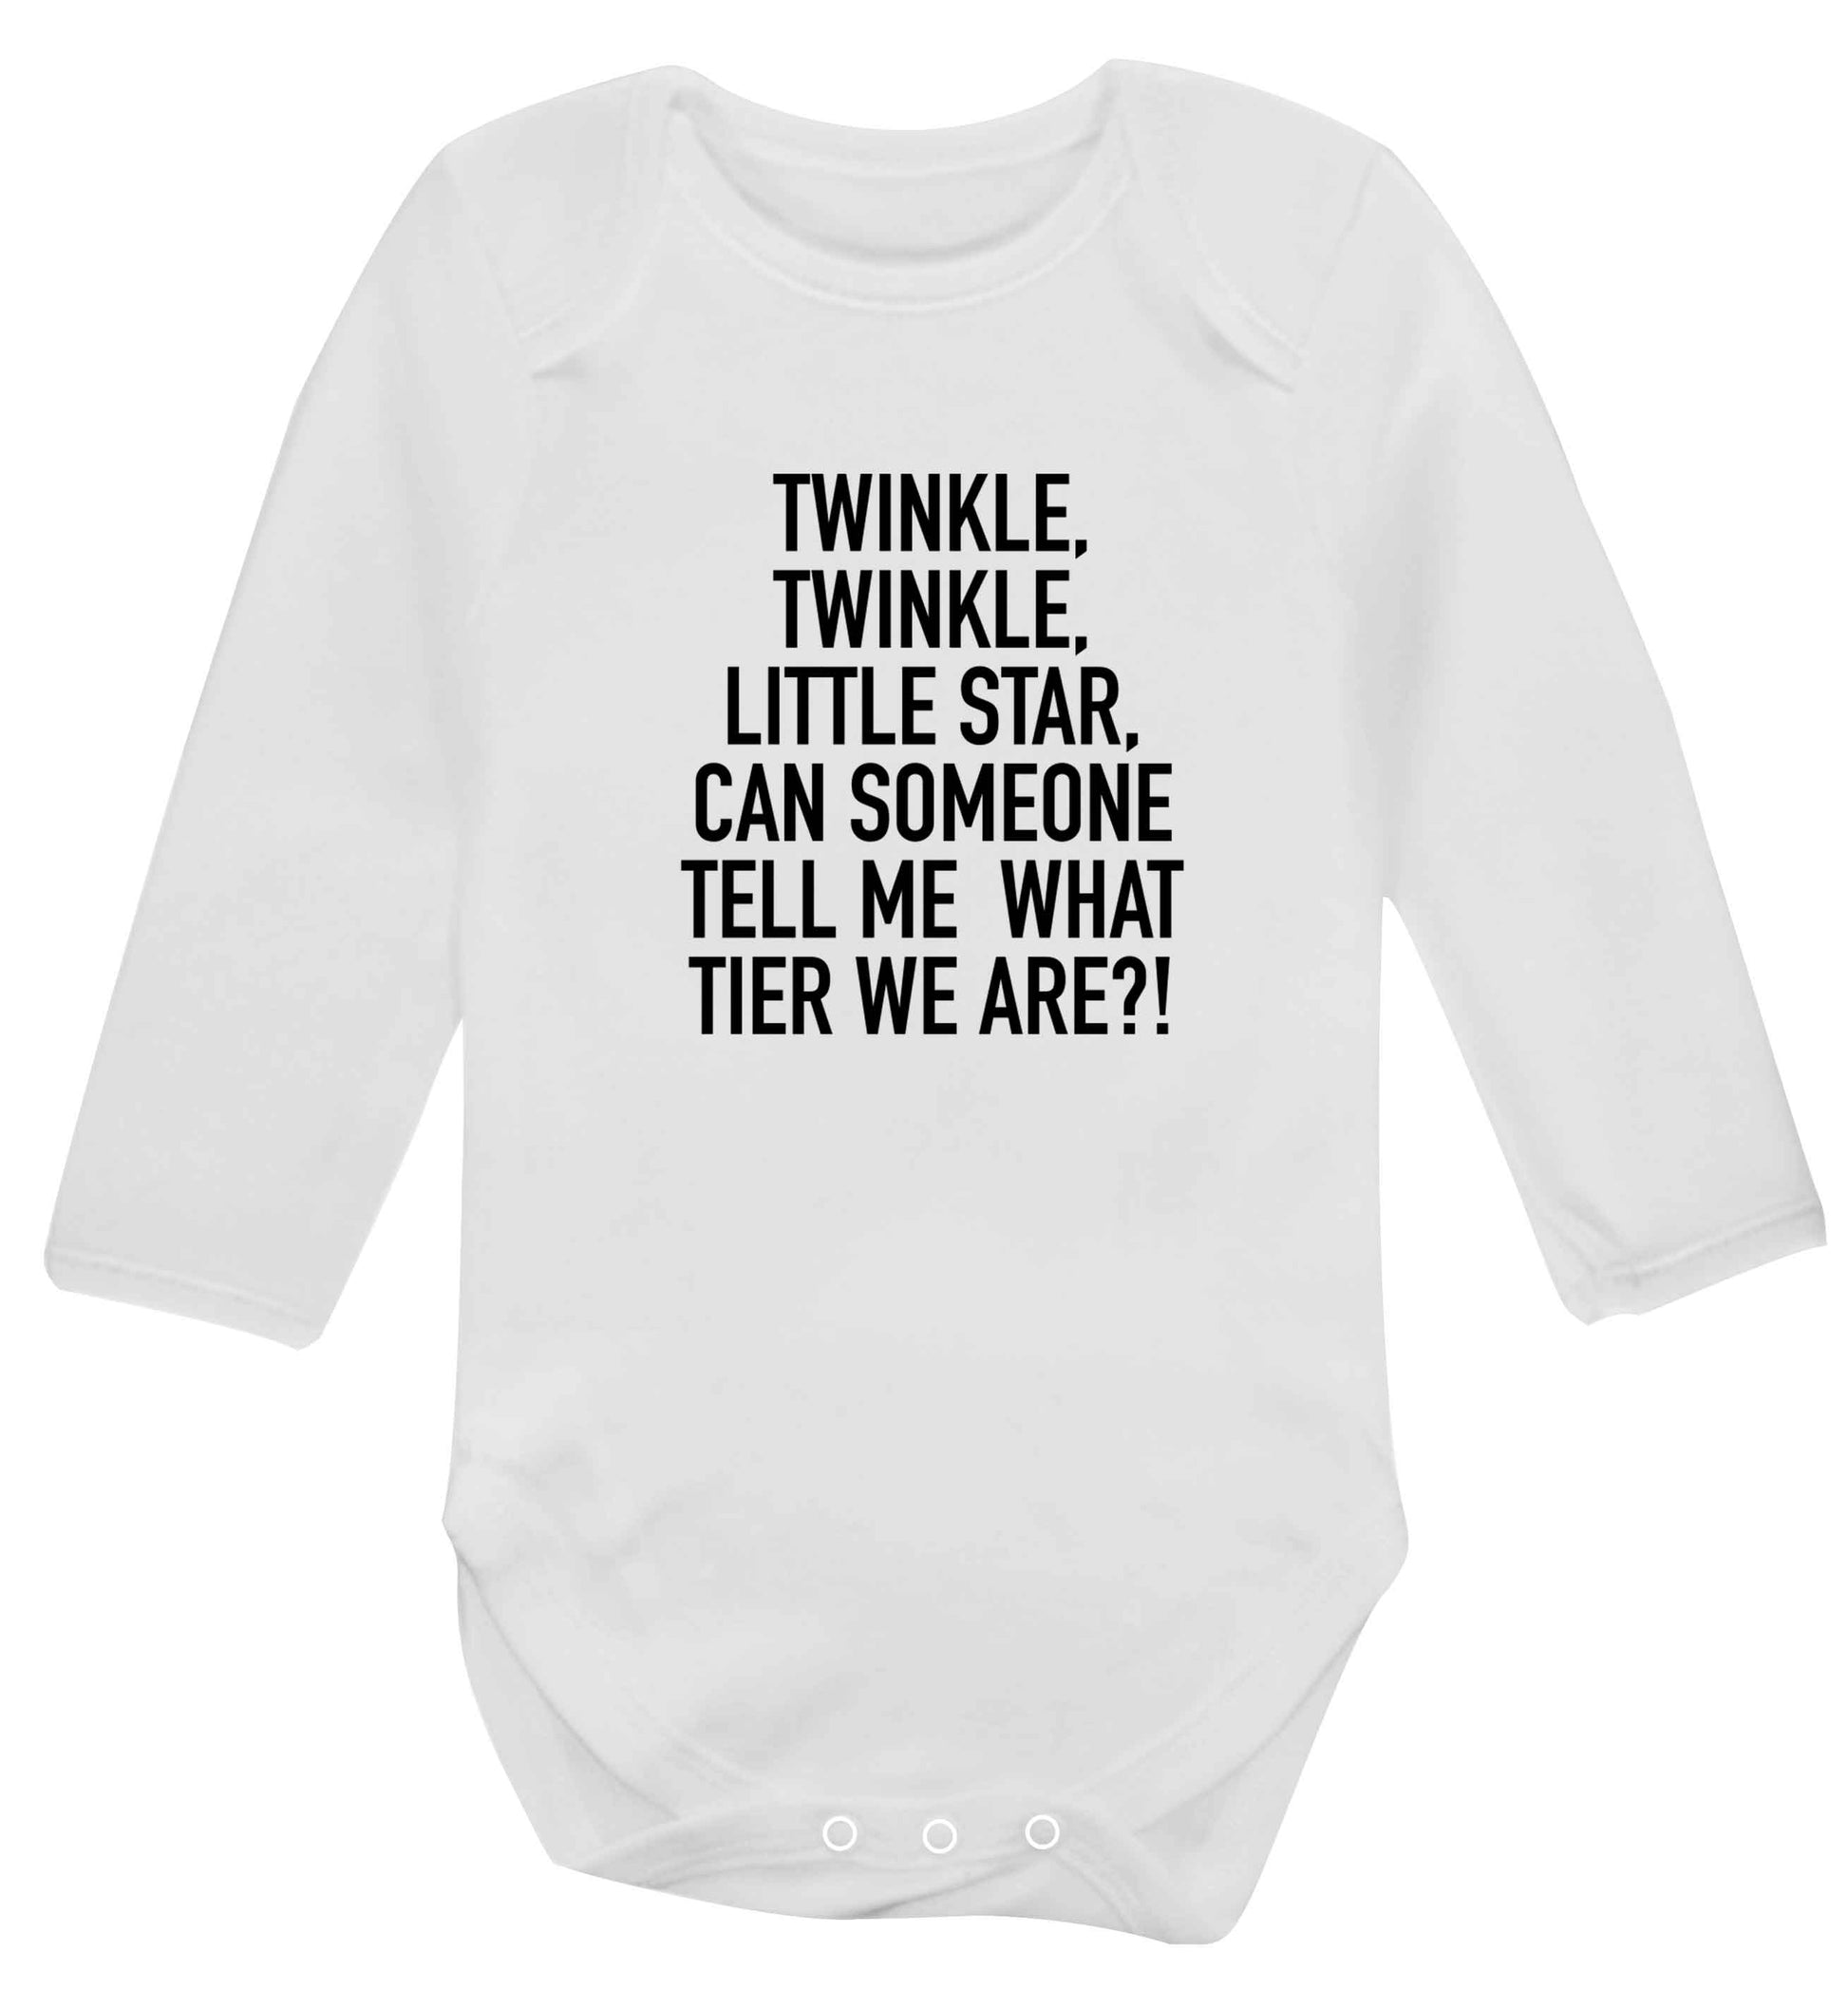 Twinkle twinkle, little star does anyone know what tier we are? baby vest long sleeved white 6-12 months